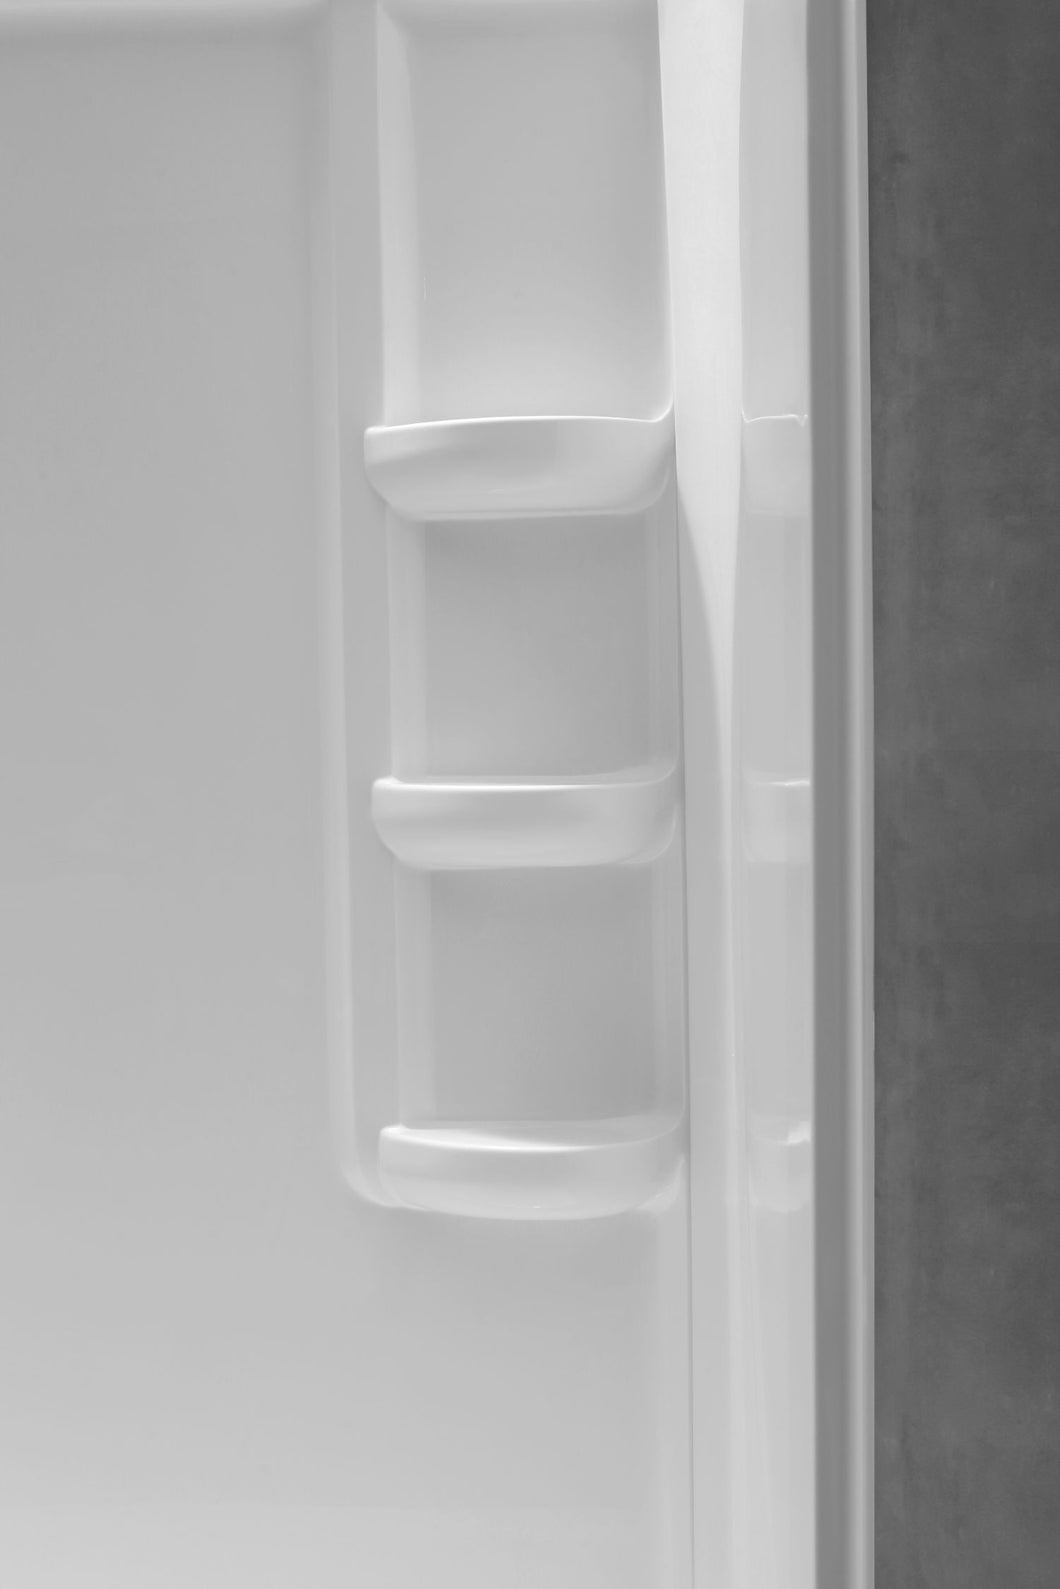 Lex-Class 60 in. x 36 in. x 74 in. 3-piece Direct-to-Stud Alcove Shower Surround in White